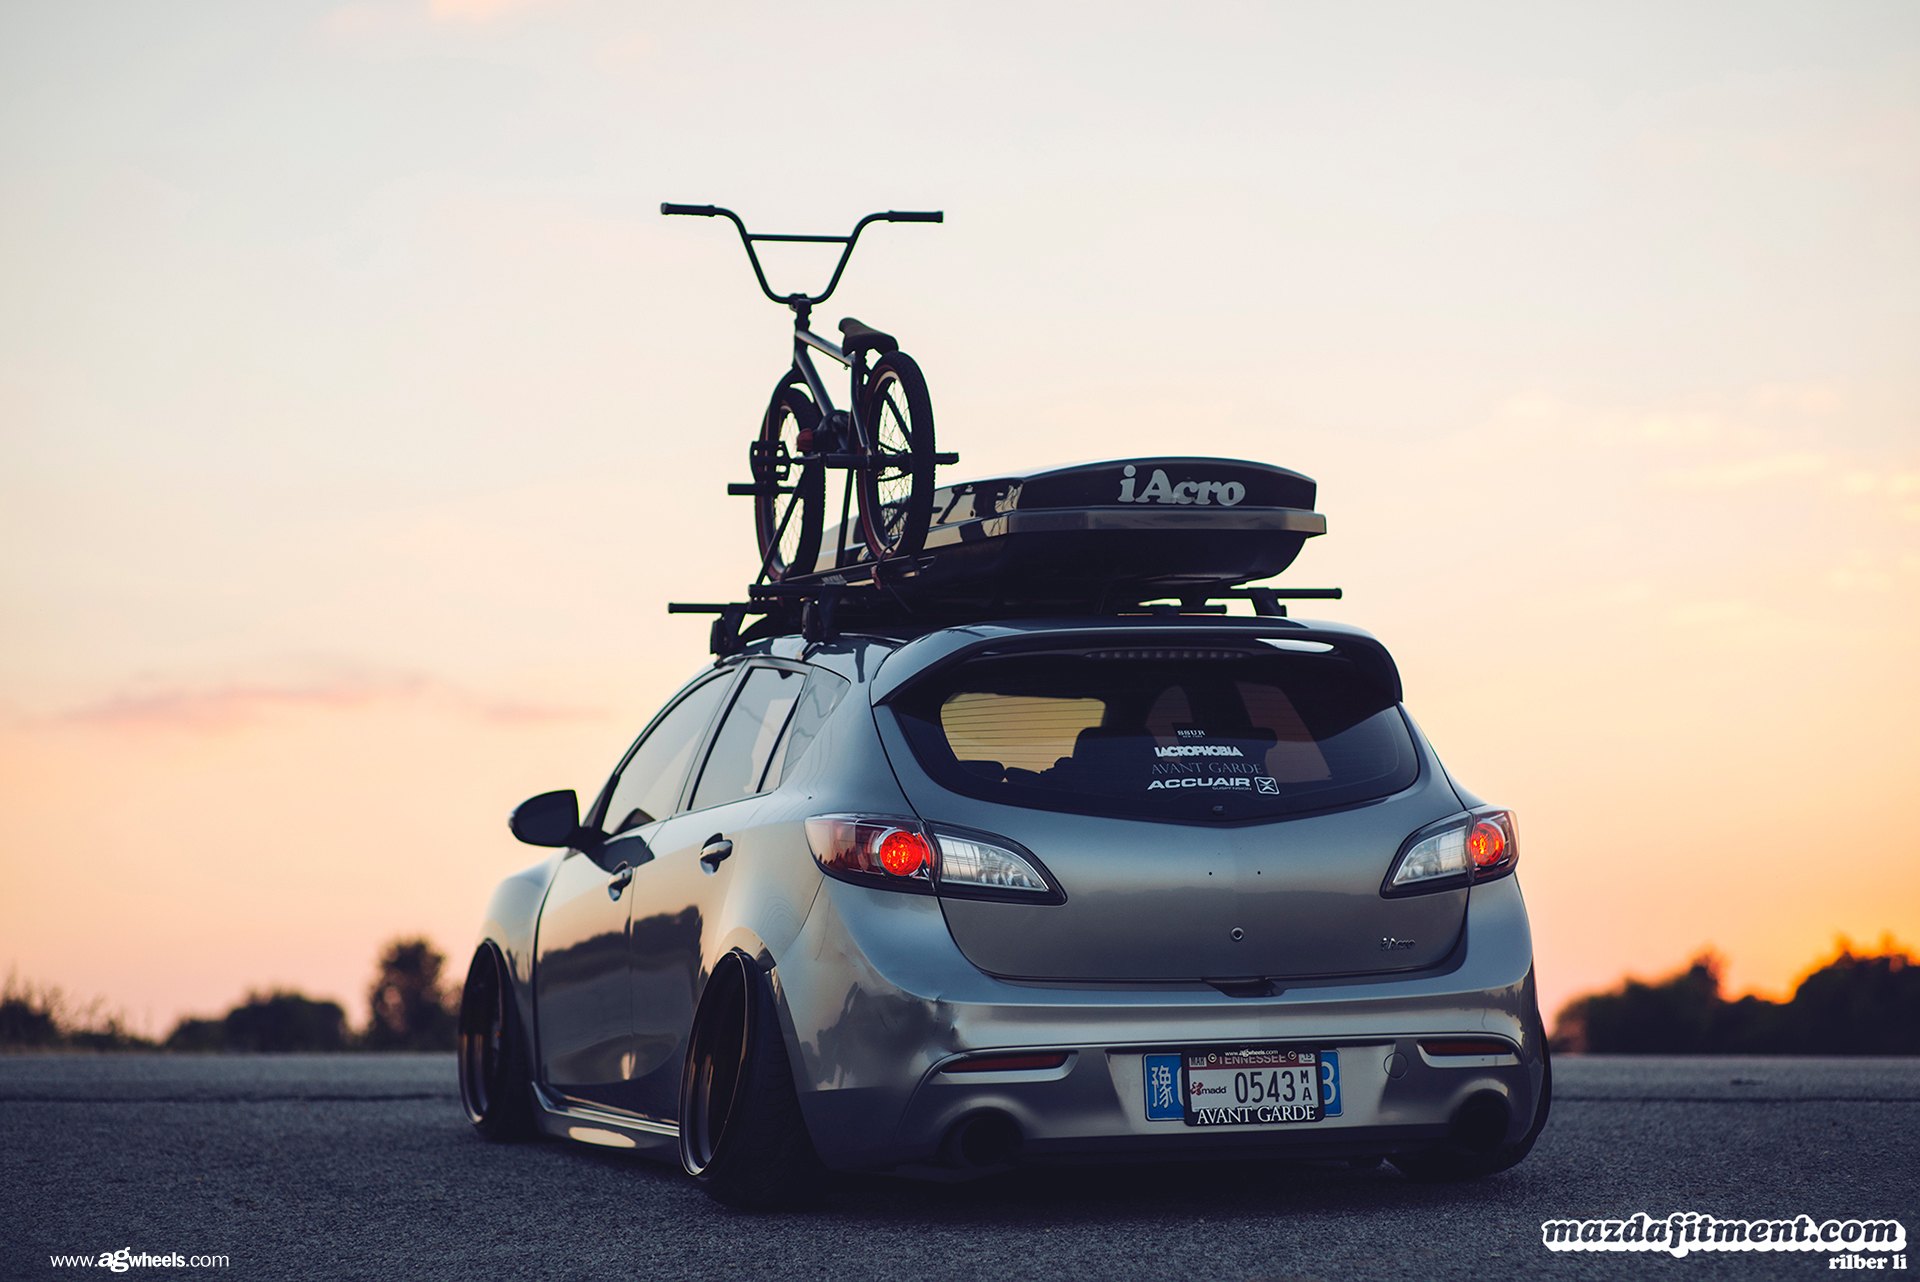 Gray Mazda 3 with Roof Rack - Photo by Avant Garde Wheels